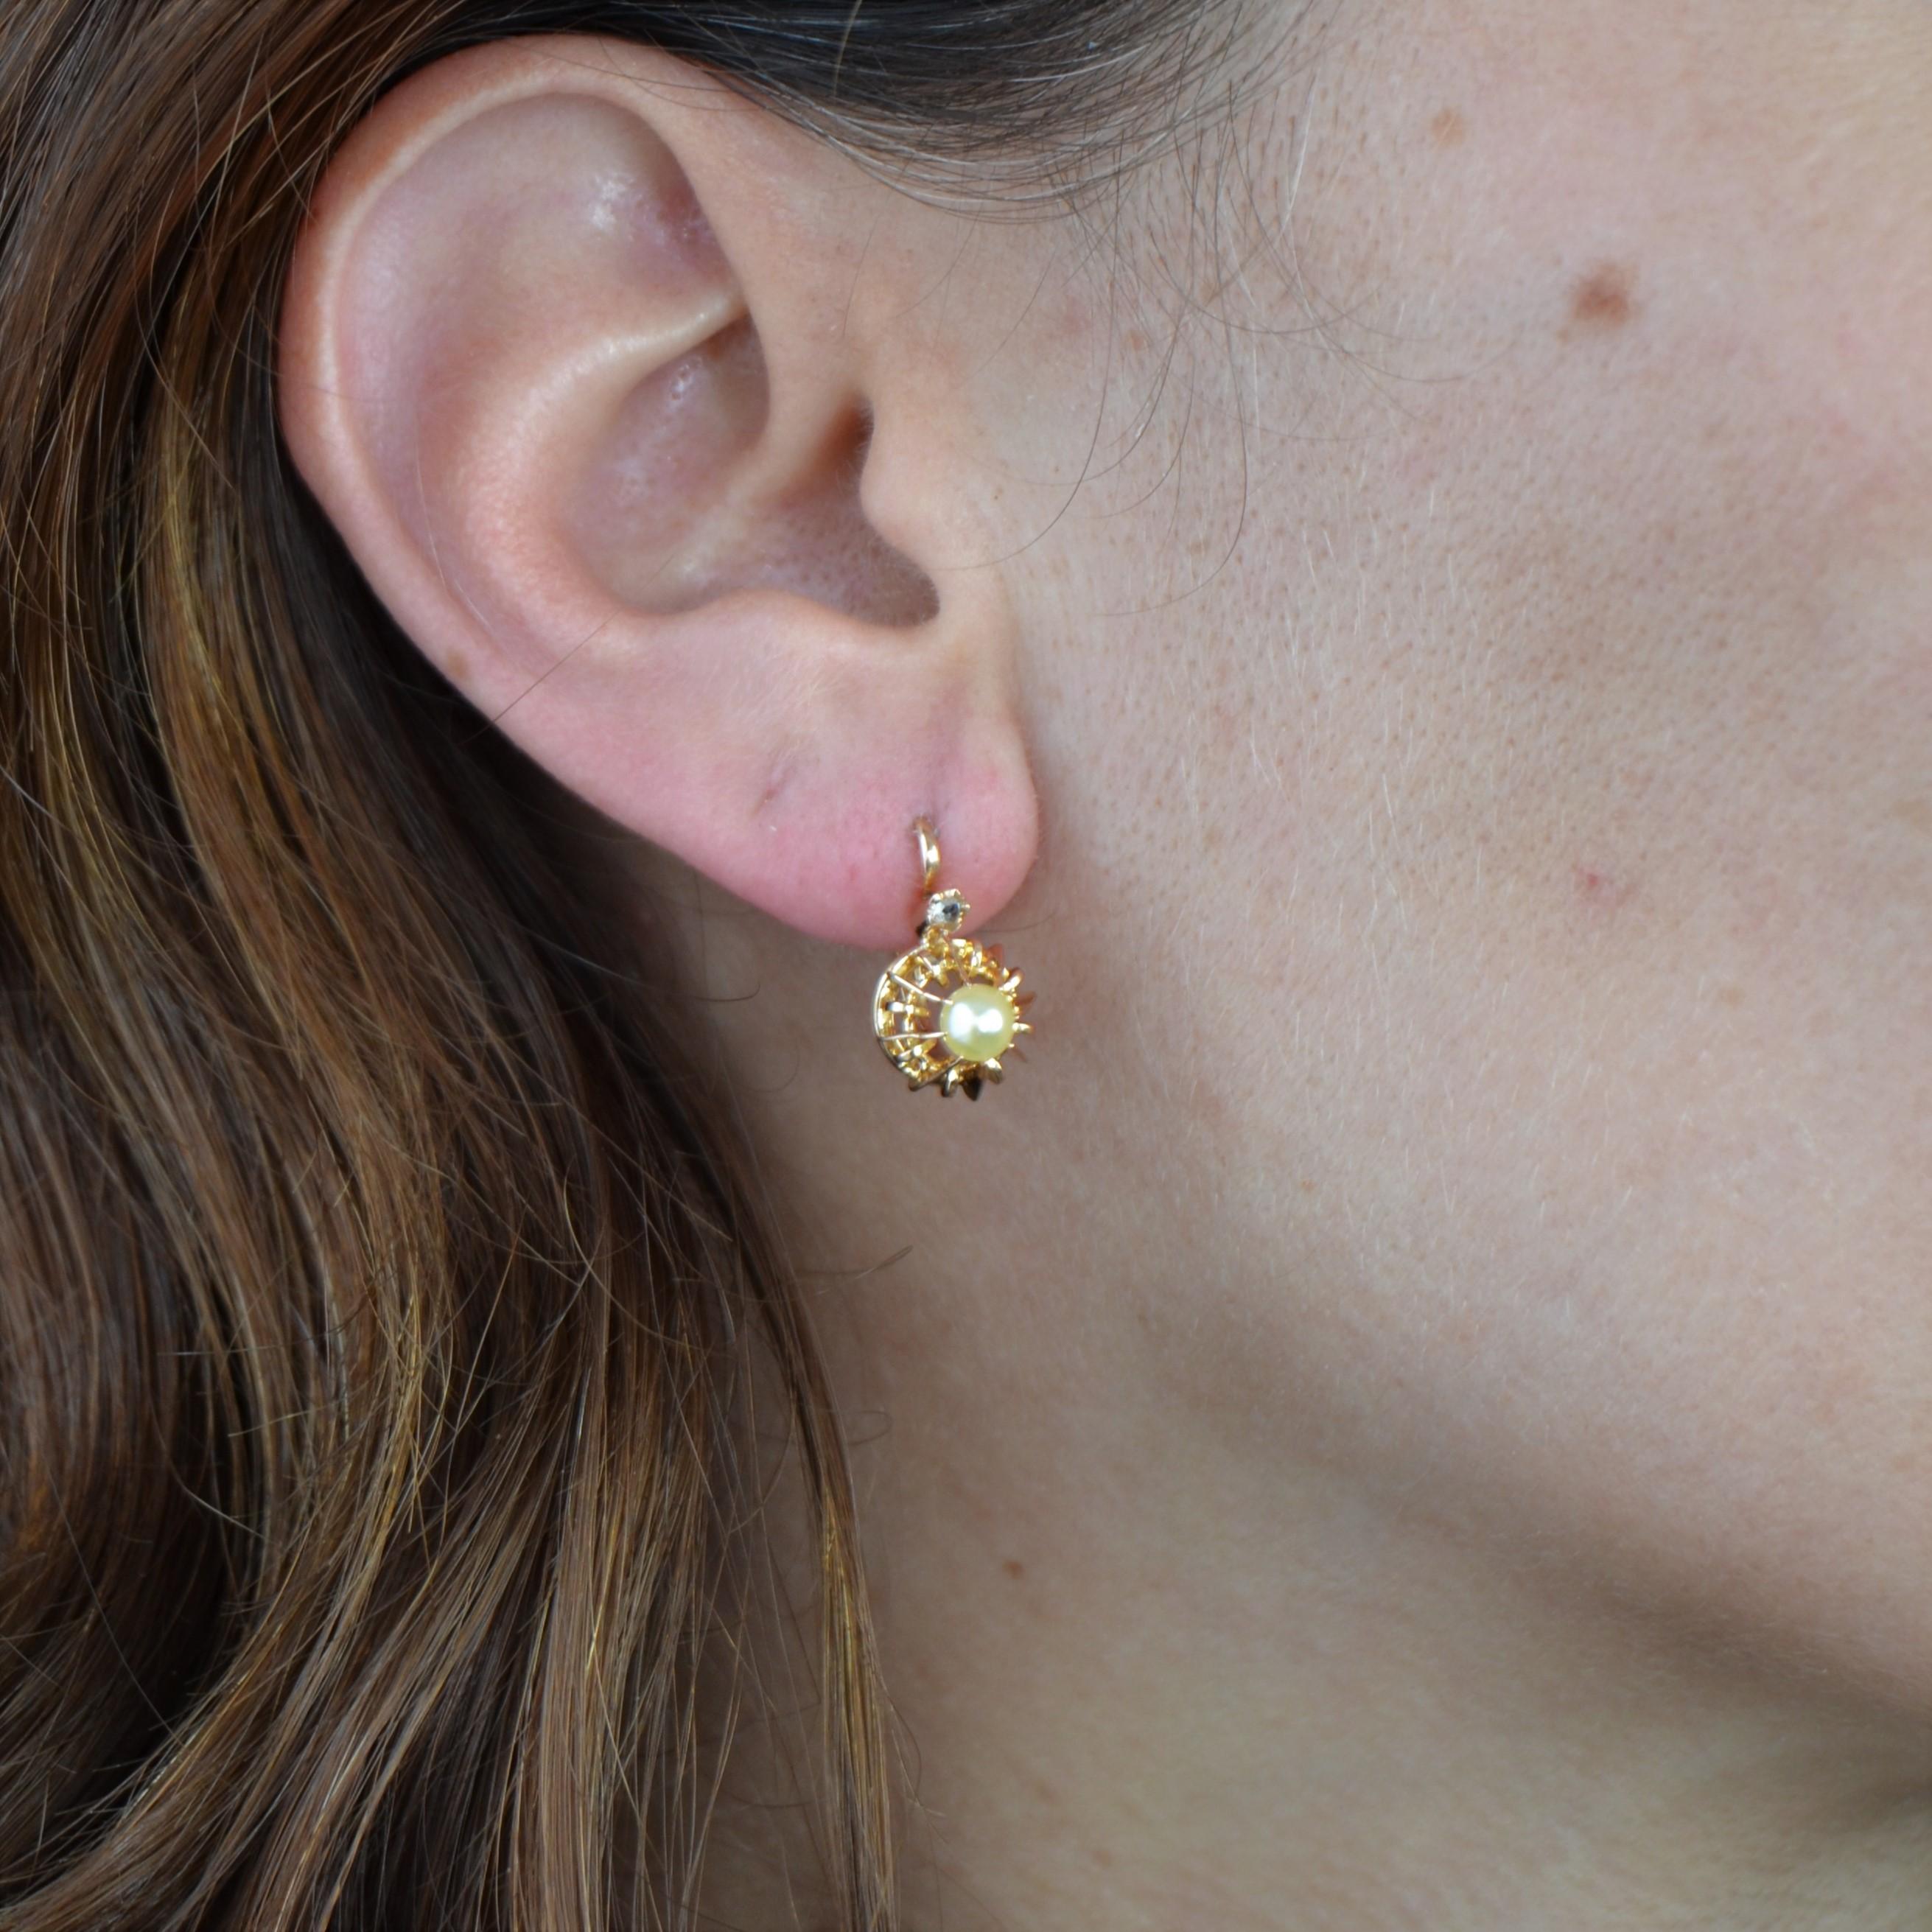 For pierced ears.
Pair of earrings in 18 karat rose gold, horse head hallmark.
Charming lever- back earrings, they are decorated in the center of a decoration made of openwork gold blades, a pearl button topped by a small rose-cut diamond, dahlia